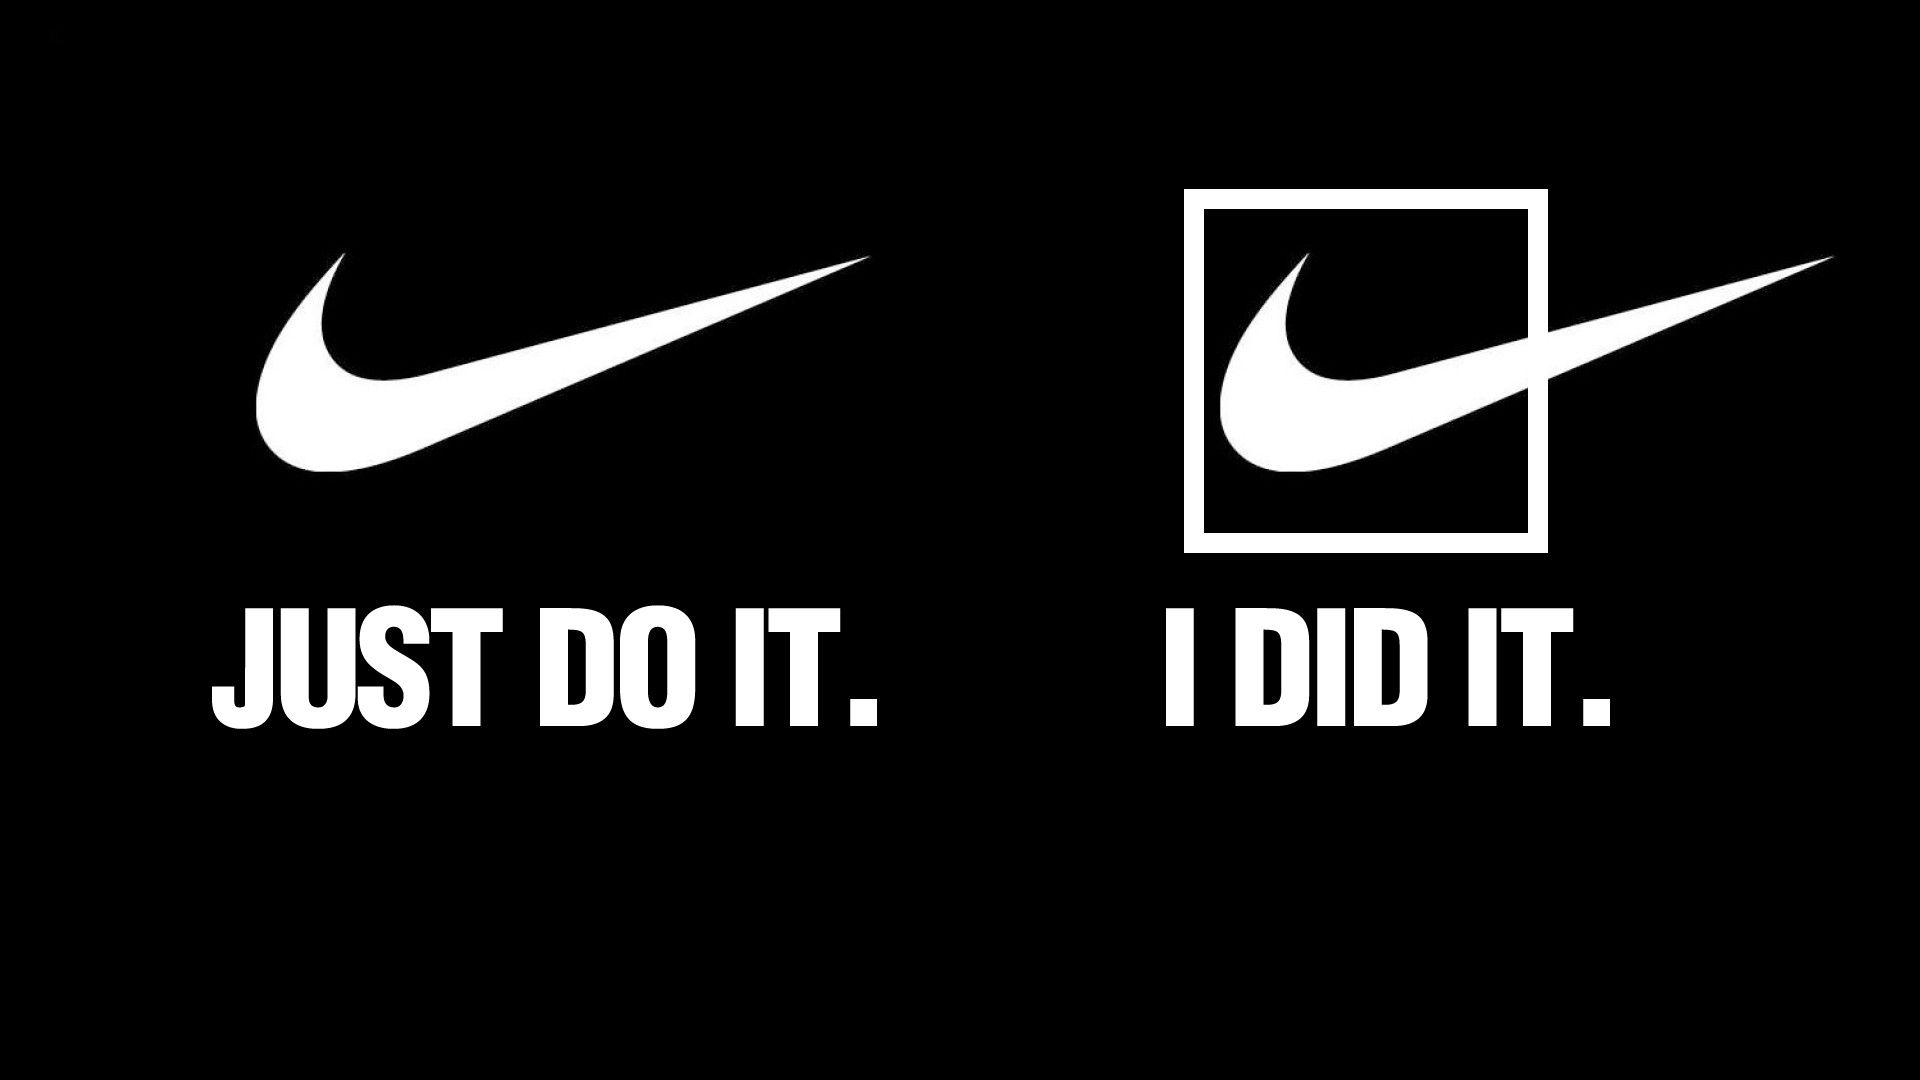 Black Background Brands Just Do It Nike Quotes Slogan